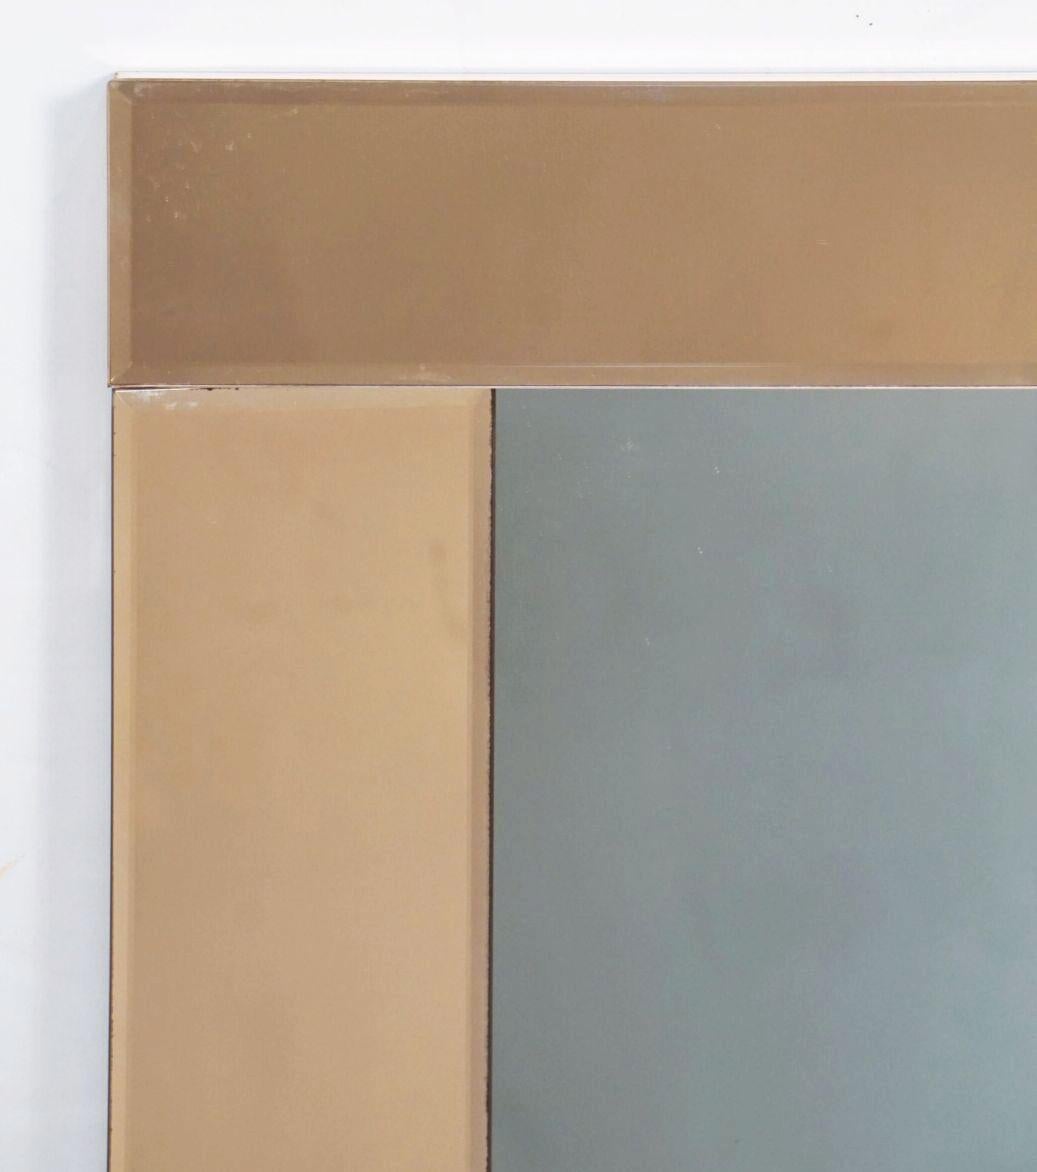 20th Century Art Deco Era Square Wall Mirror from England (H 20 1/4 x W 20 1/4) For Sale